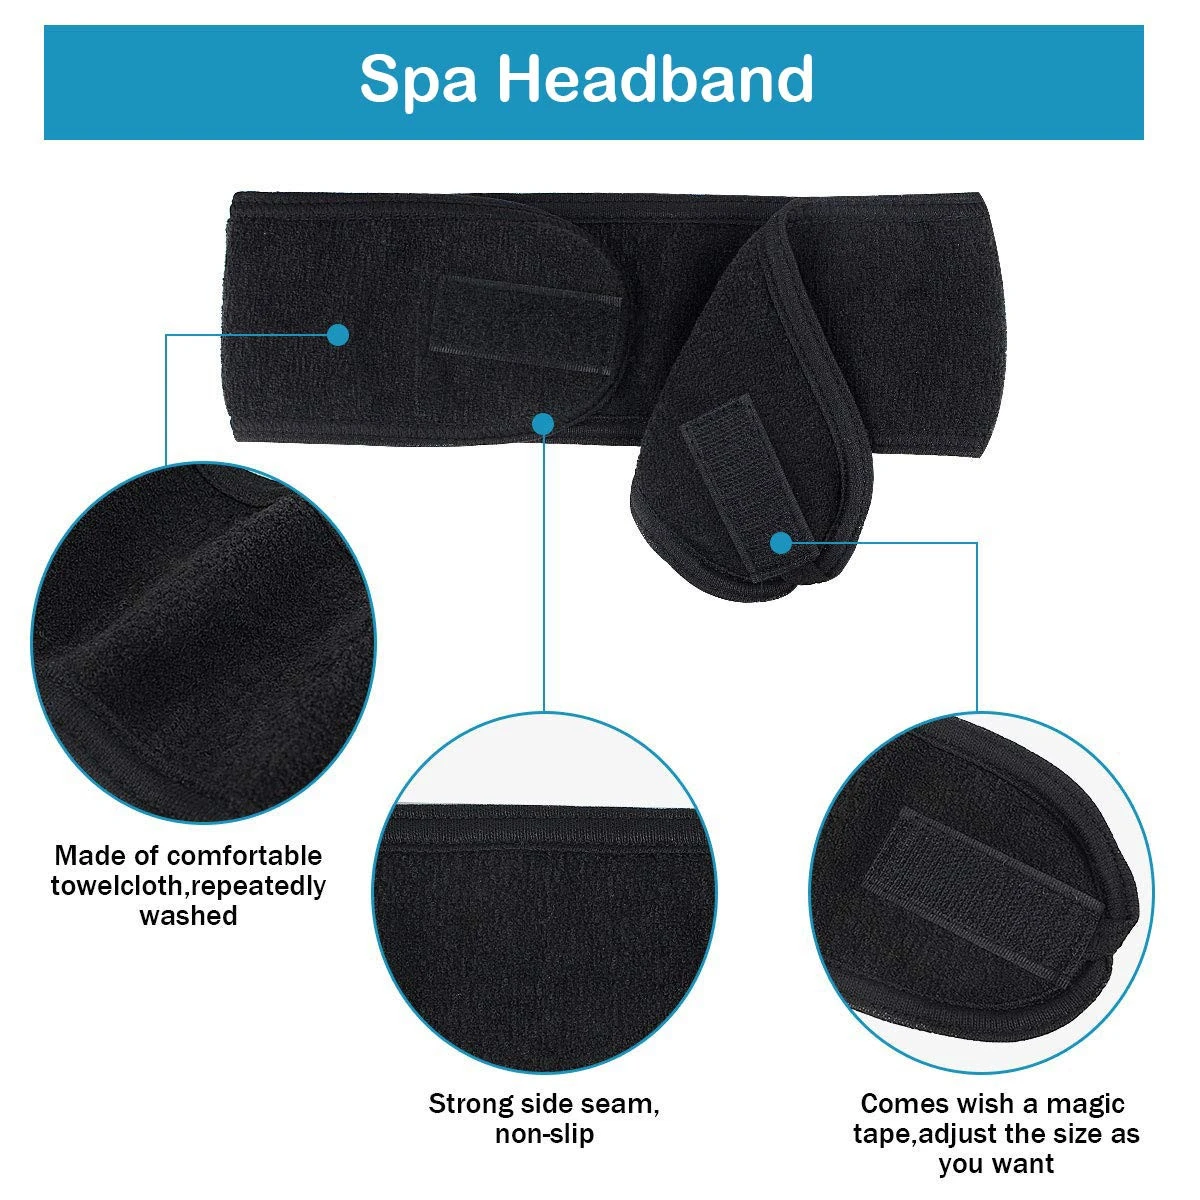 Amazon Top 100 Seller Ant Terry Cloth Face Wash Spa Sport Head Bands,Facial Spa Makeup Sport hair band Hairband